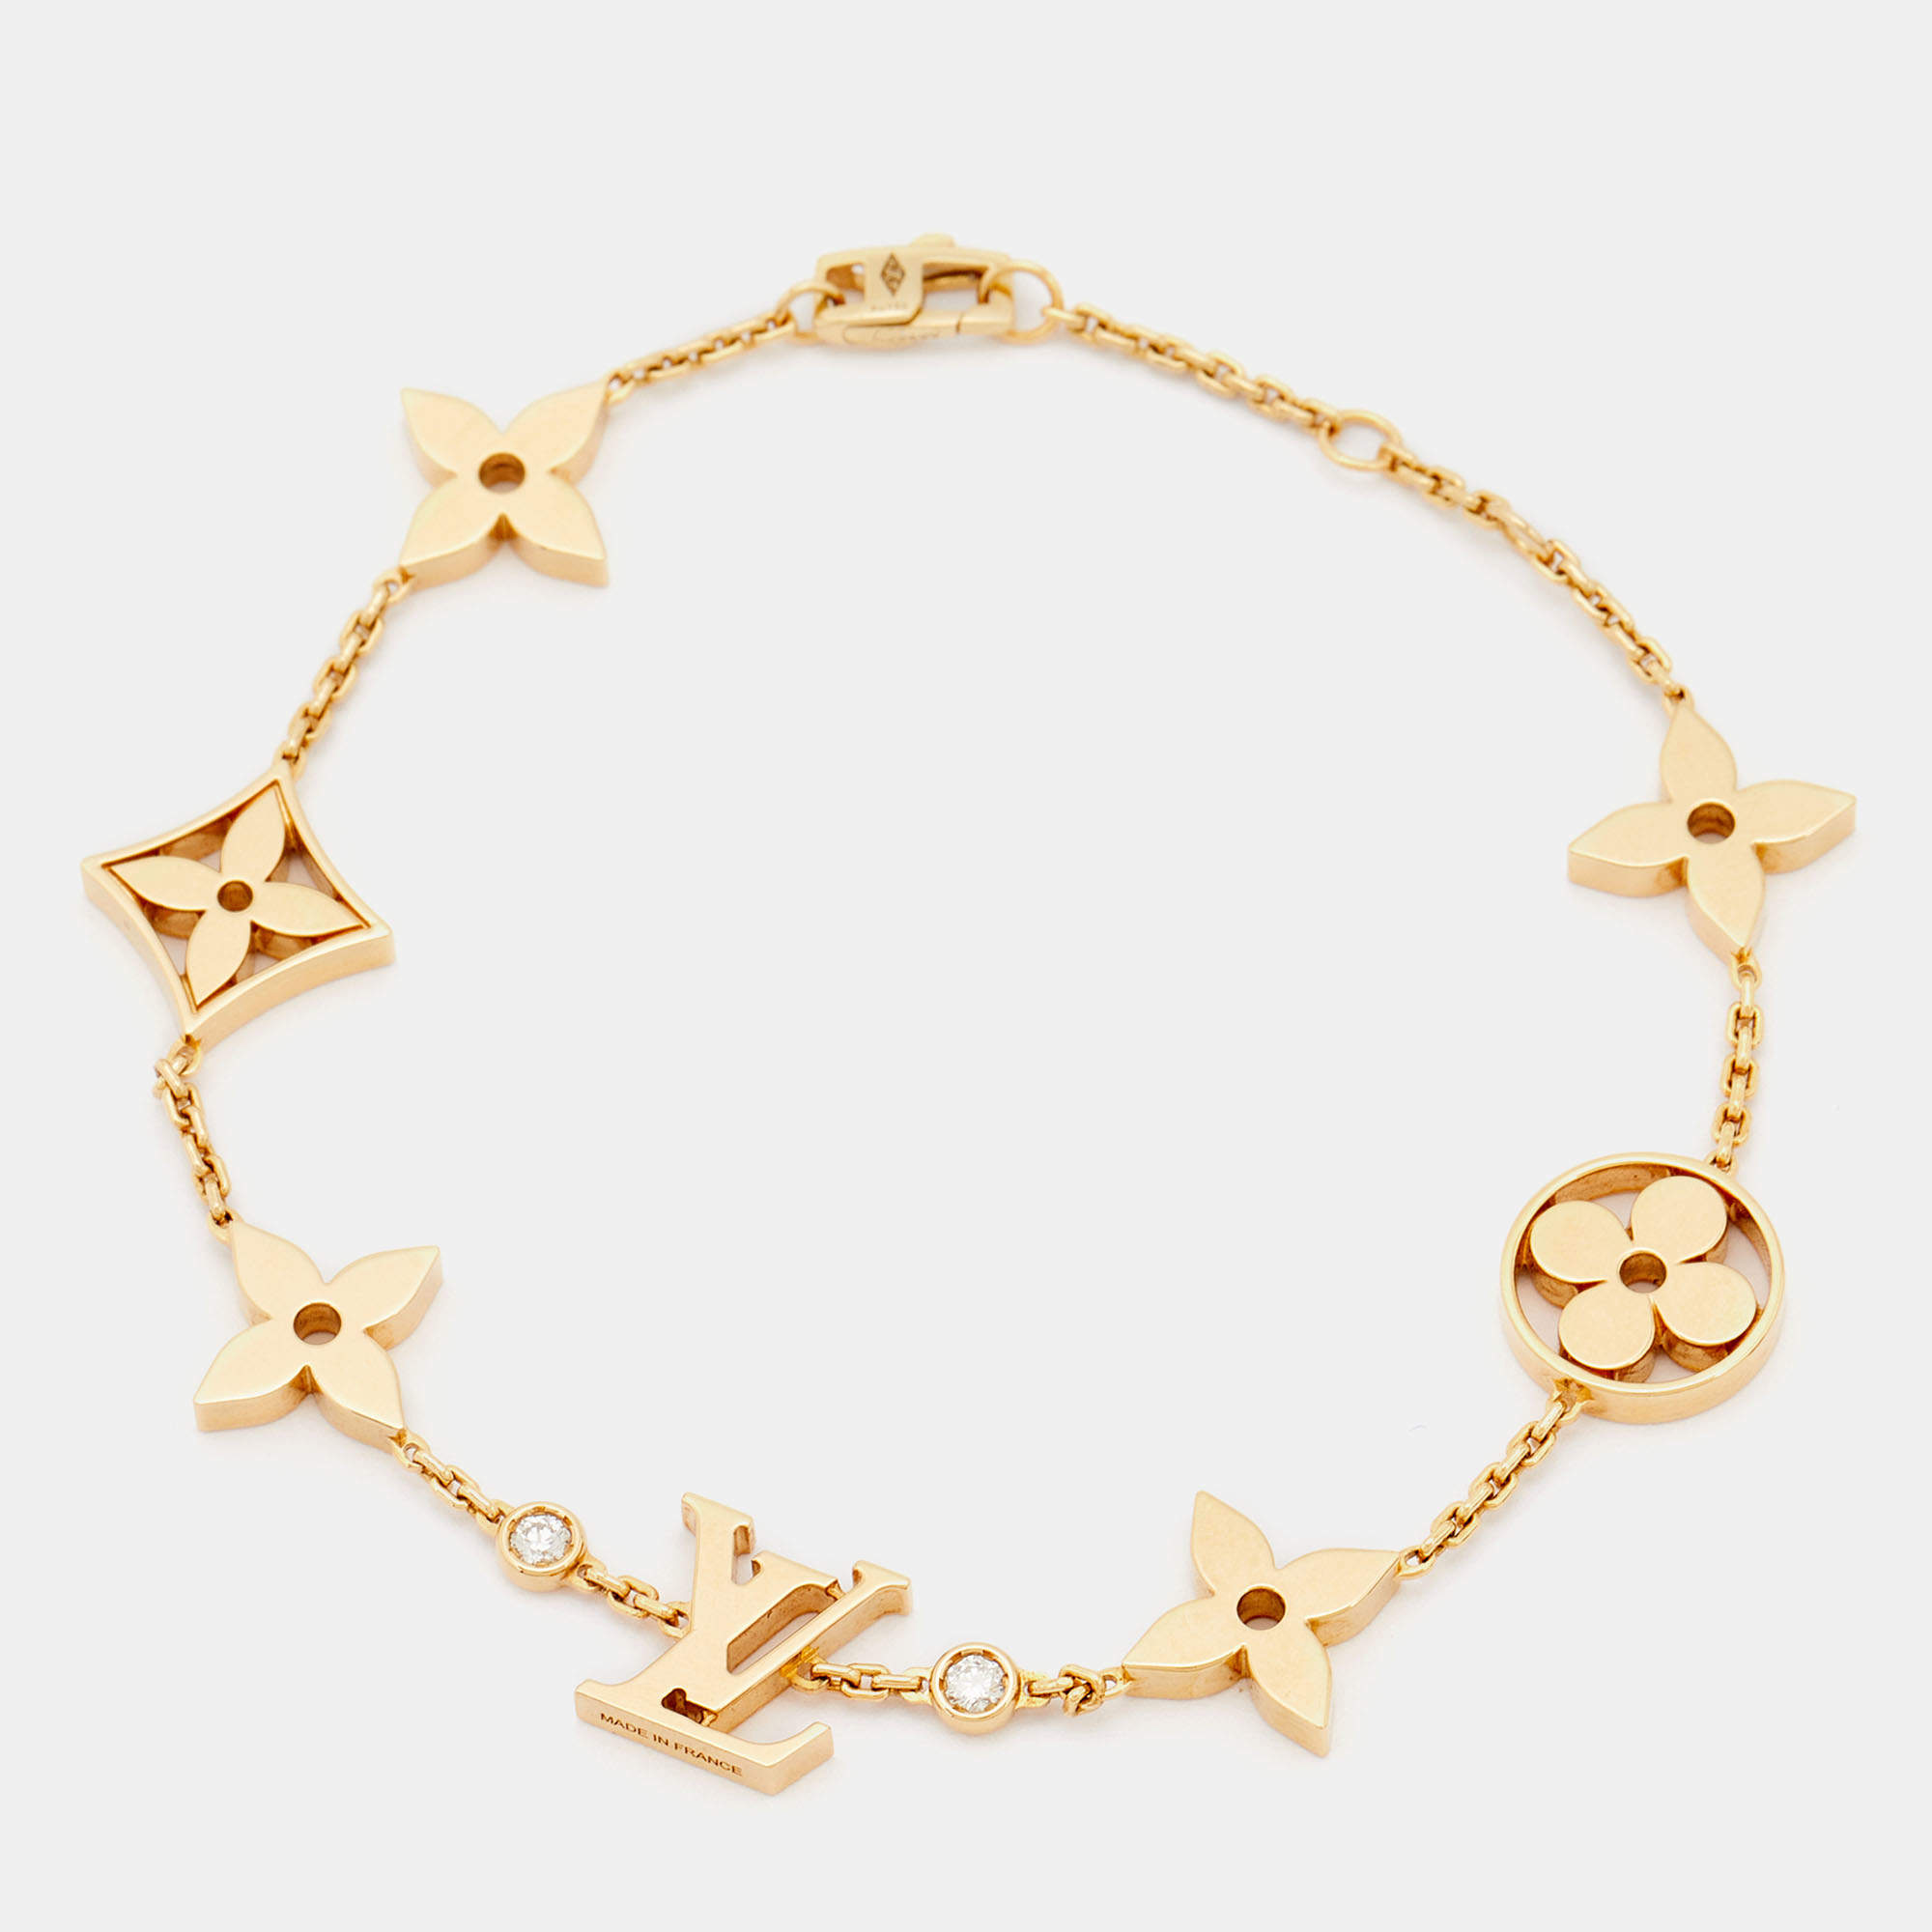 Products by Louis Vuitton: Idylle Blossom Monogram Bracelet, Yellow Gold  and Diamonds in 2023